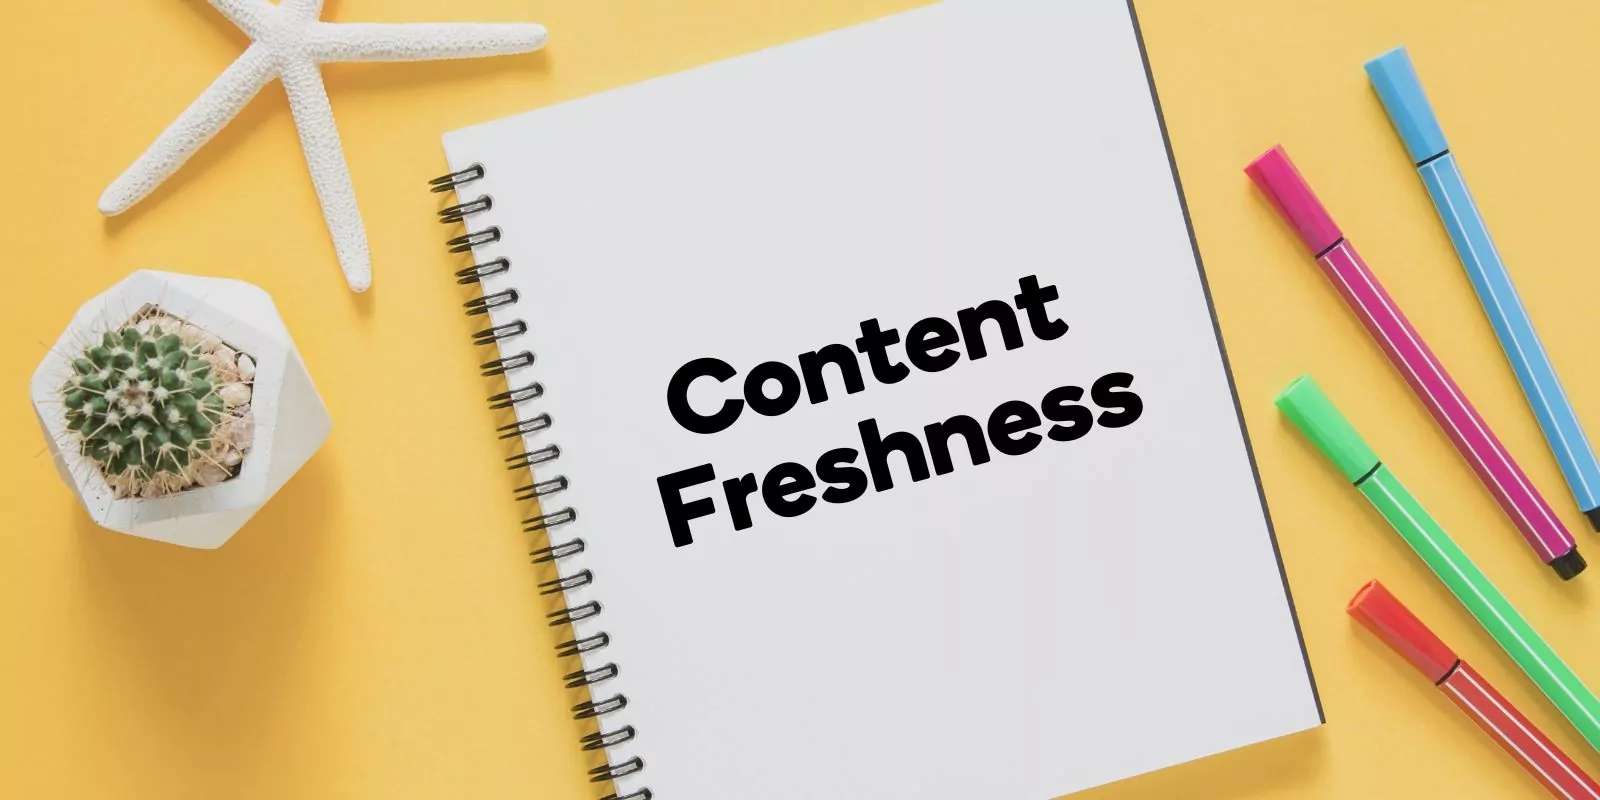 Content Freshness: Keeping Your Website Relevant and Engaging